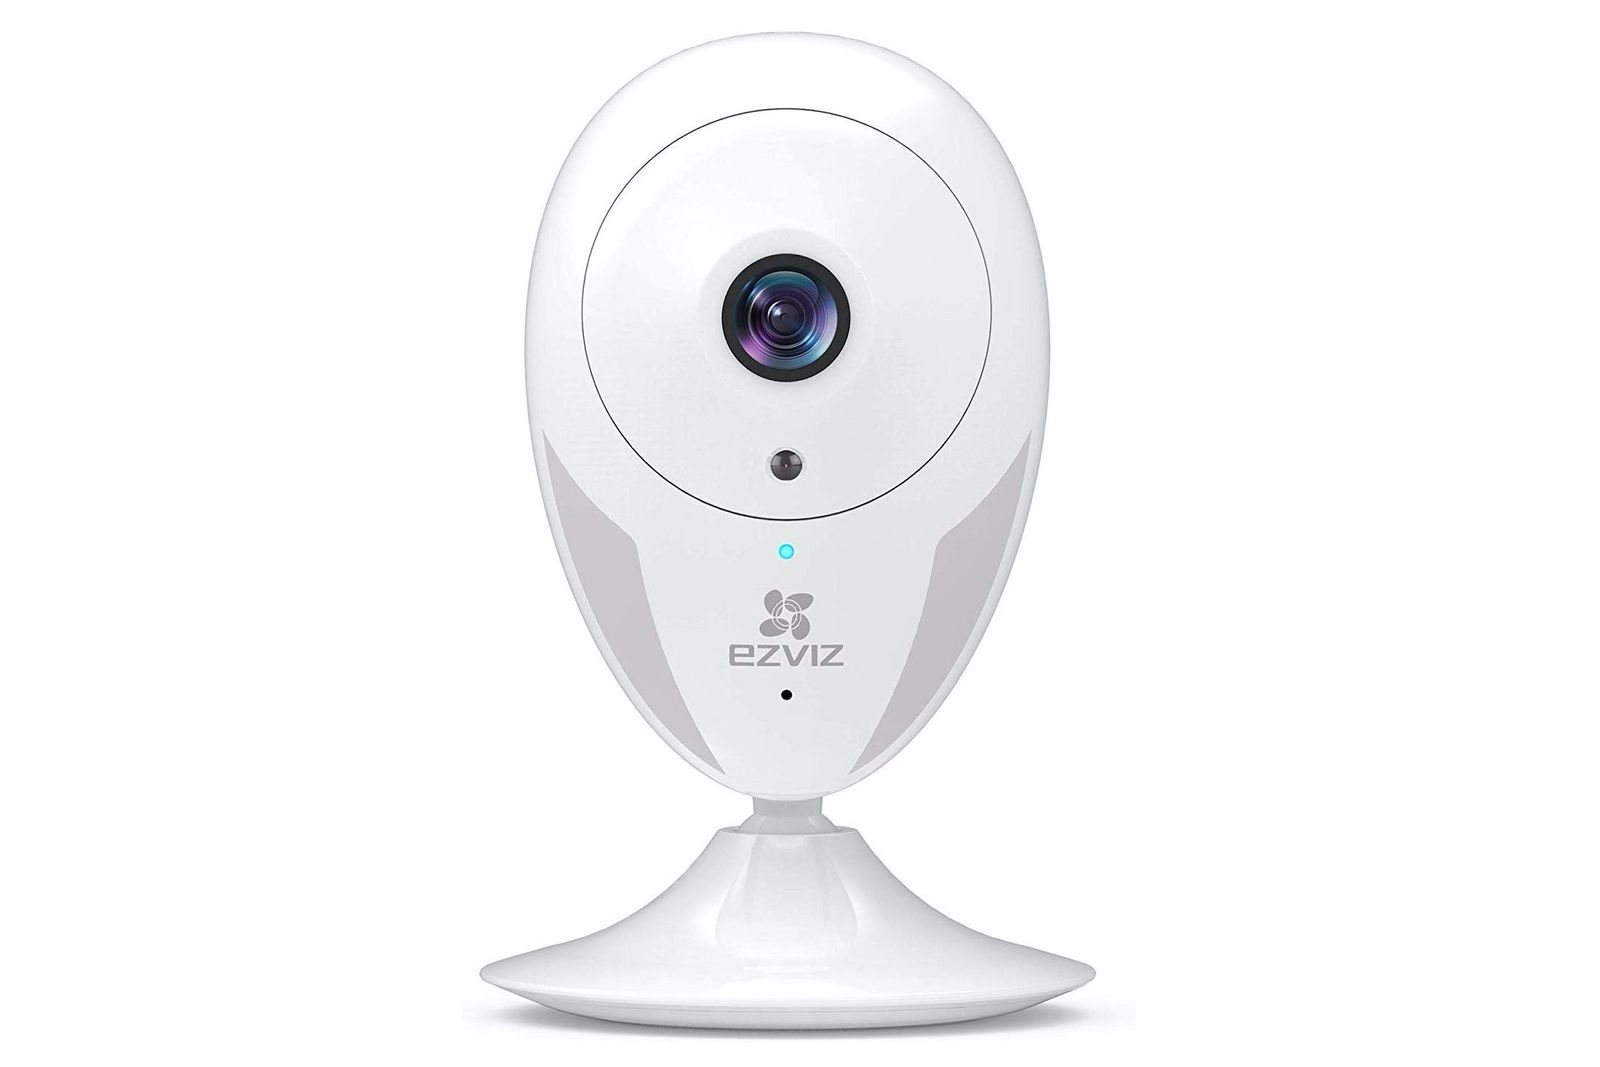 The Best Deals On Home Security Cameras From Ezviz image 4